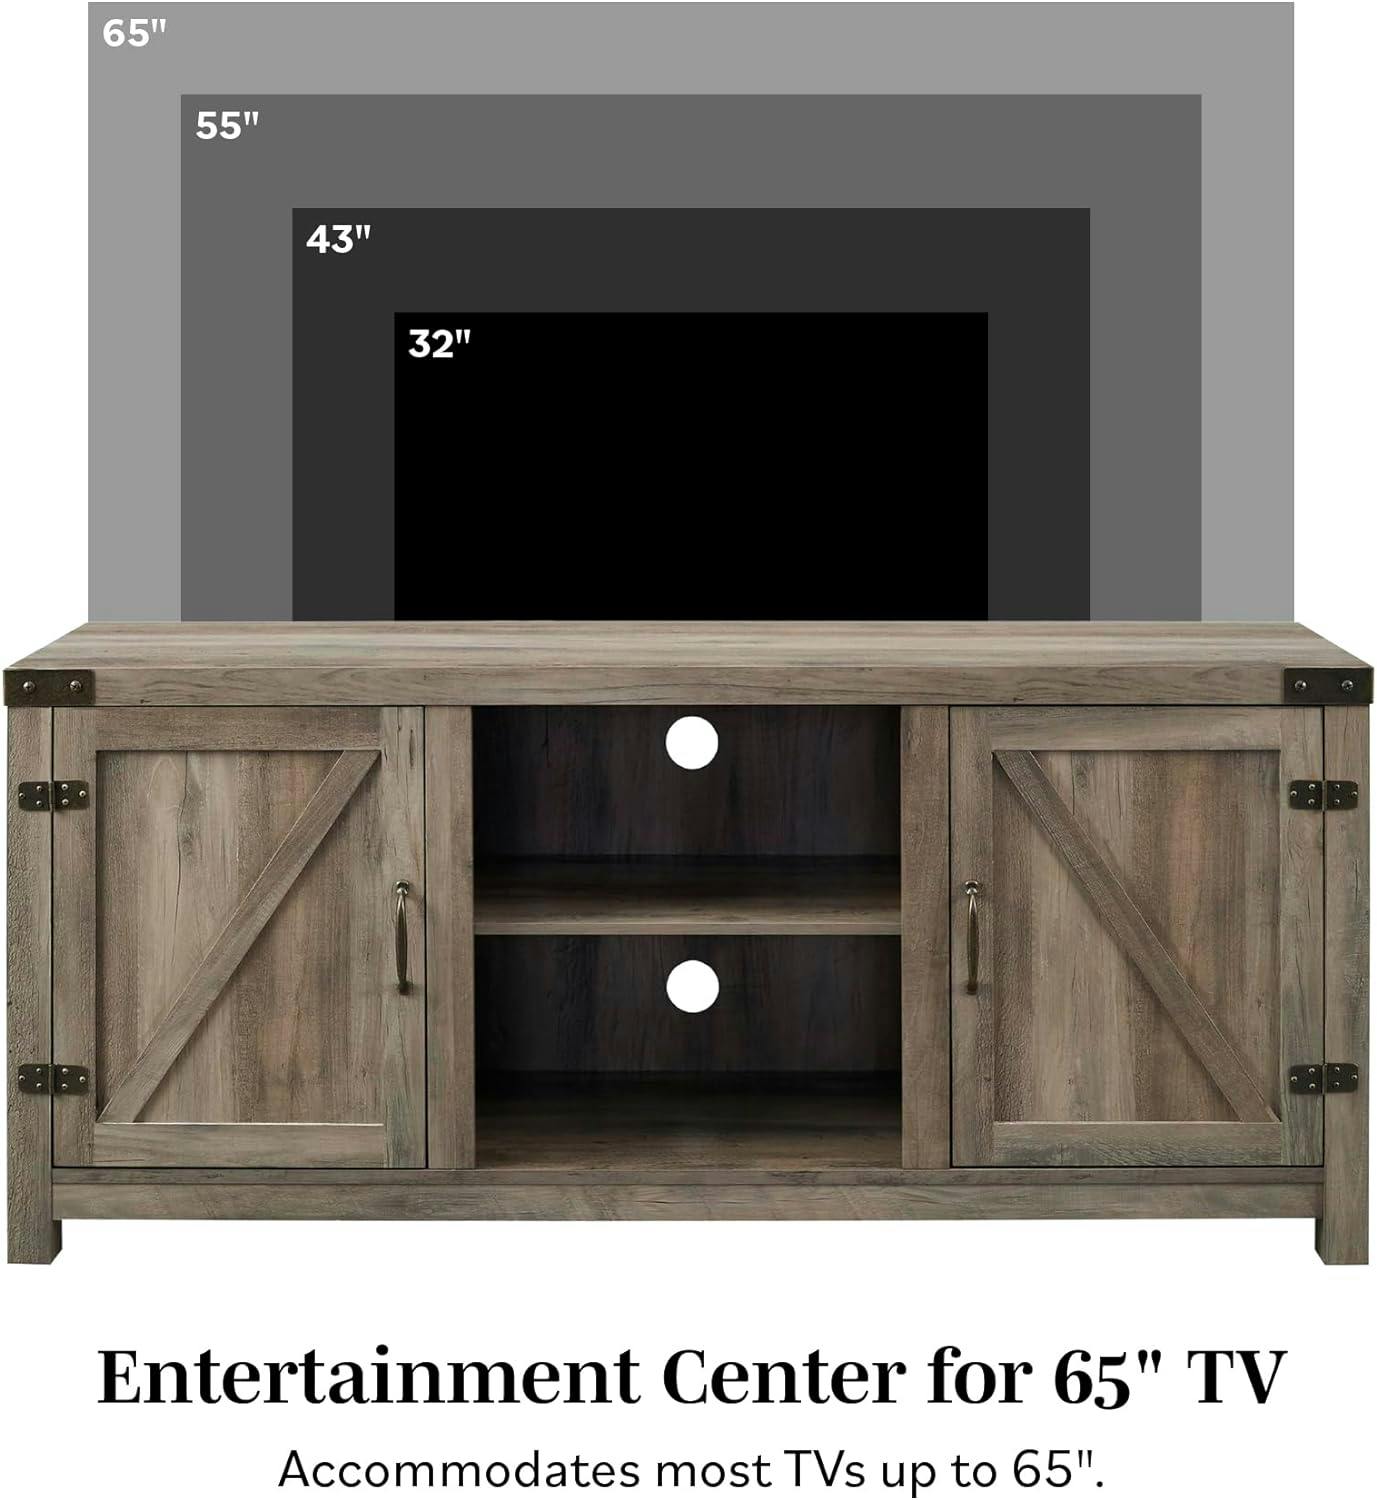 Walker Edison Classic White Oak 58" TV Stand with Cabinet